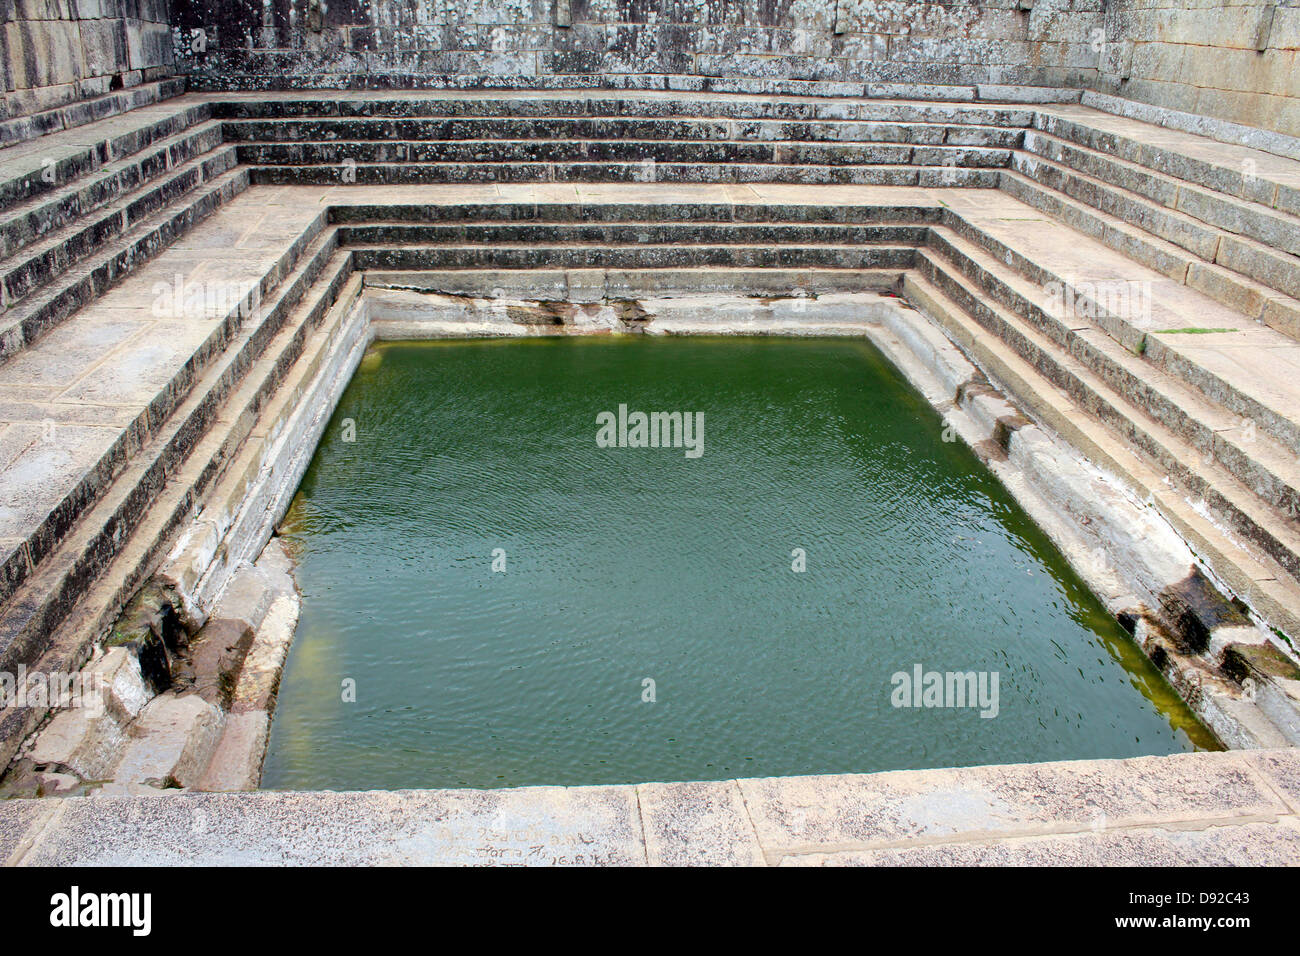 A medival pond built by emporer tipu sultan at nandi hills. Stock Photo